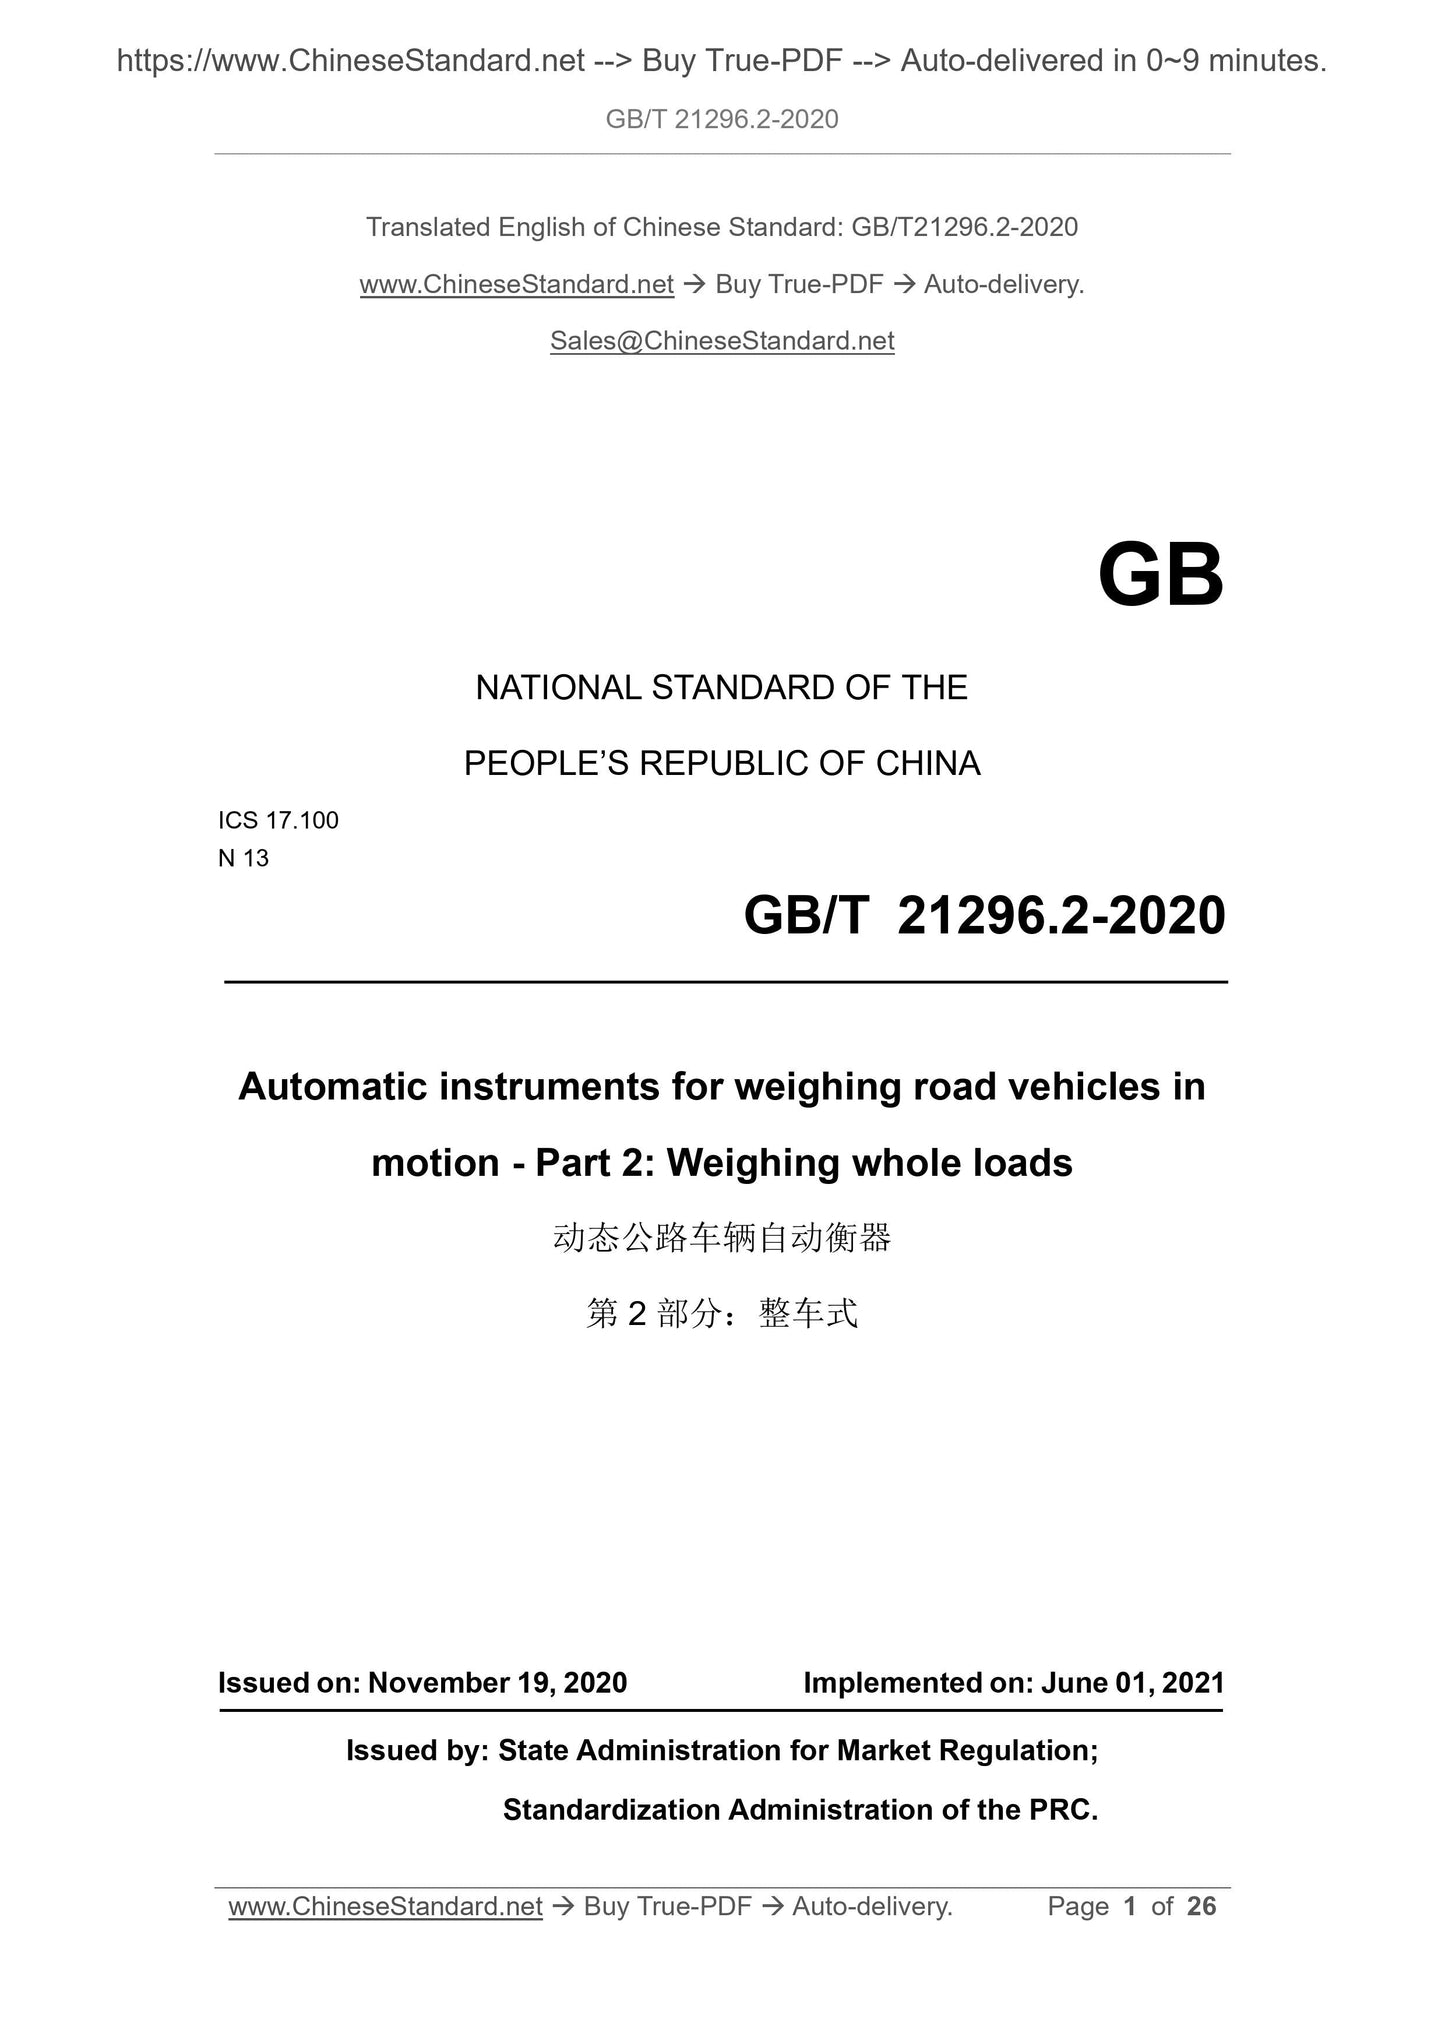 GB/T 21296.2-2020 Page 1